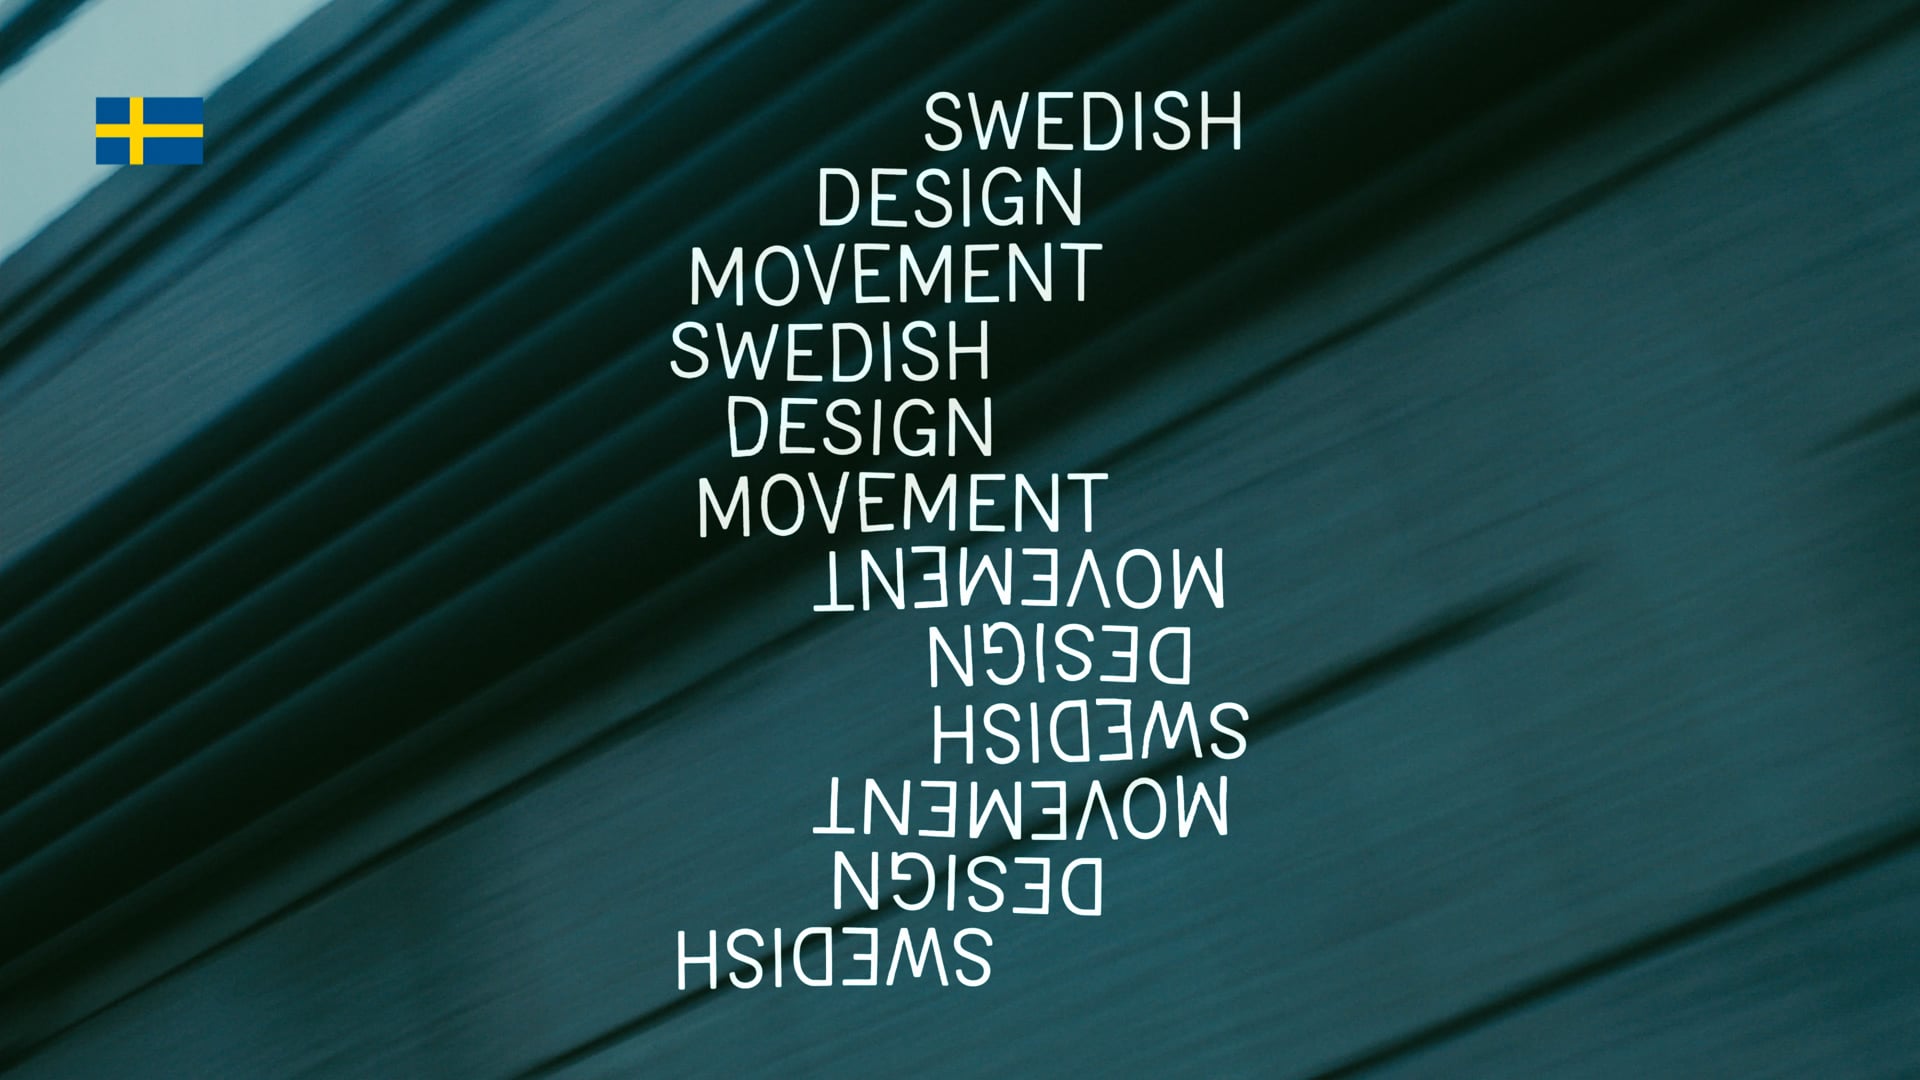 Swedish Design Movement goes virtual! New exhibition launched at